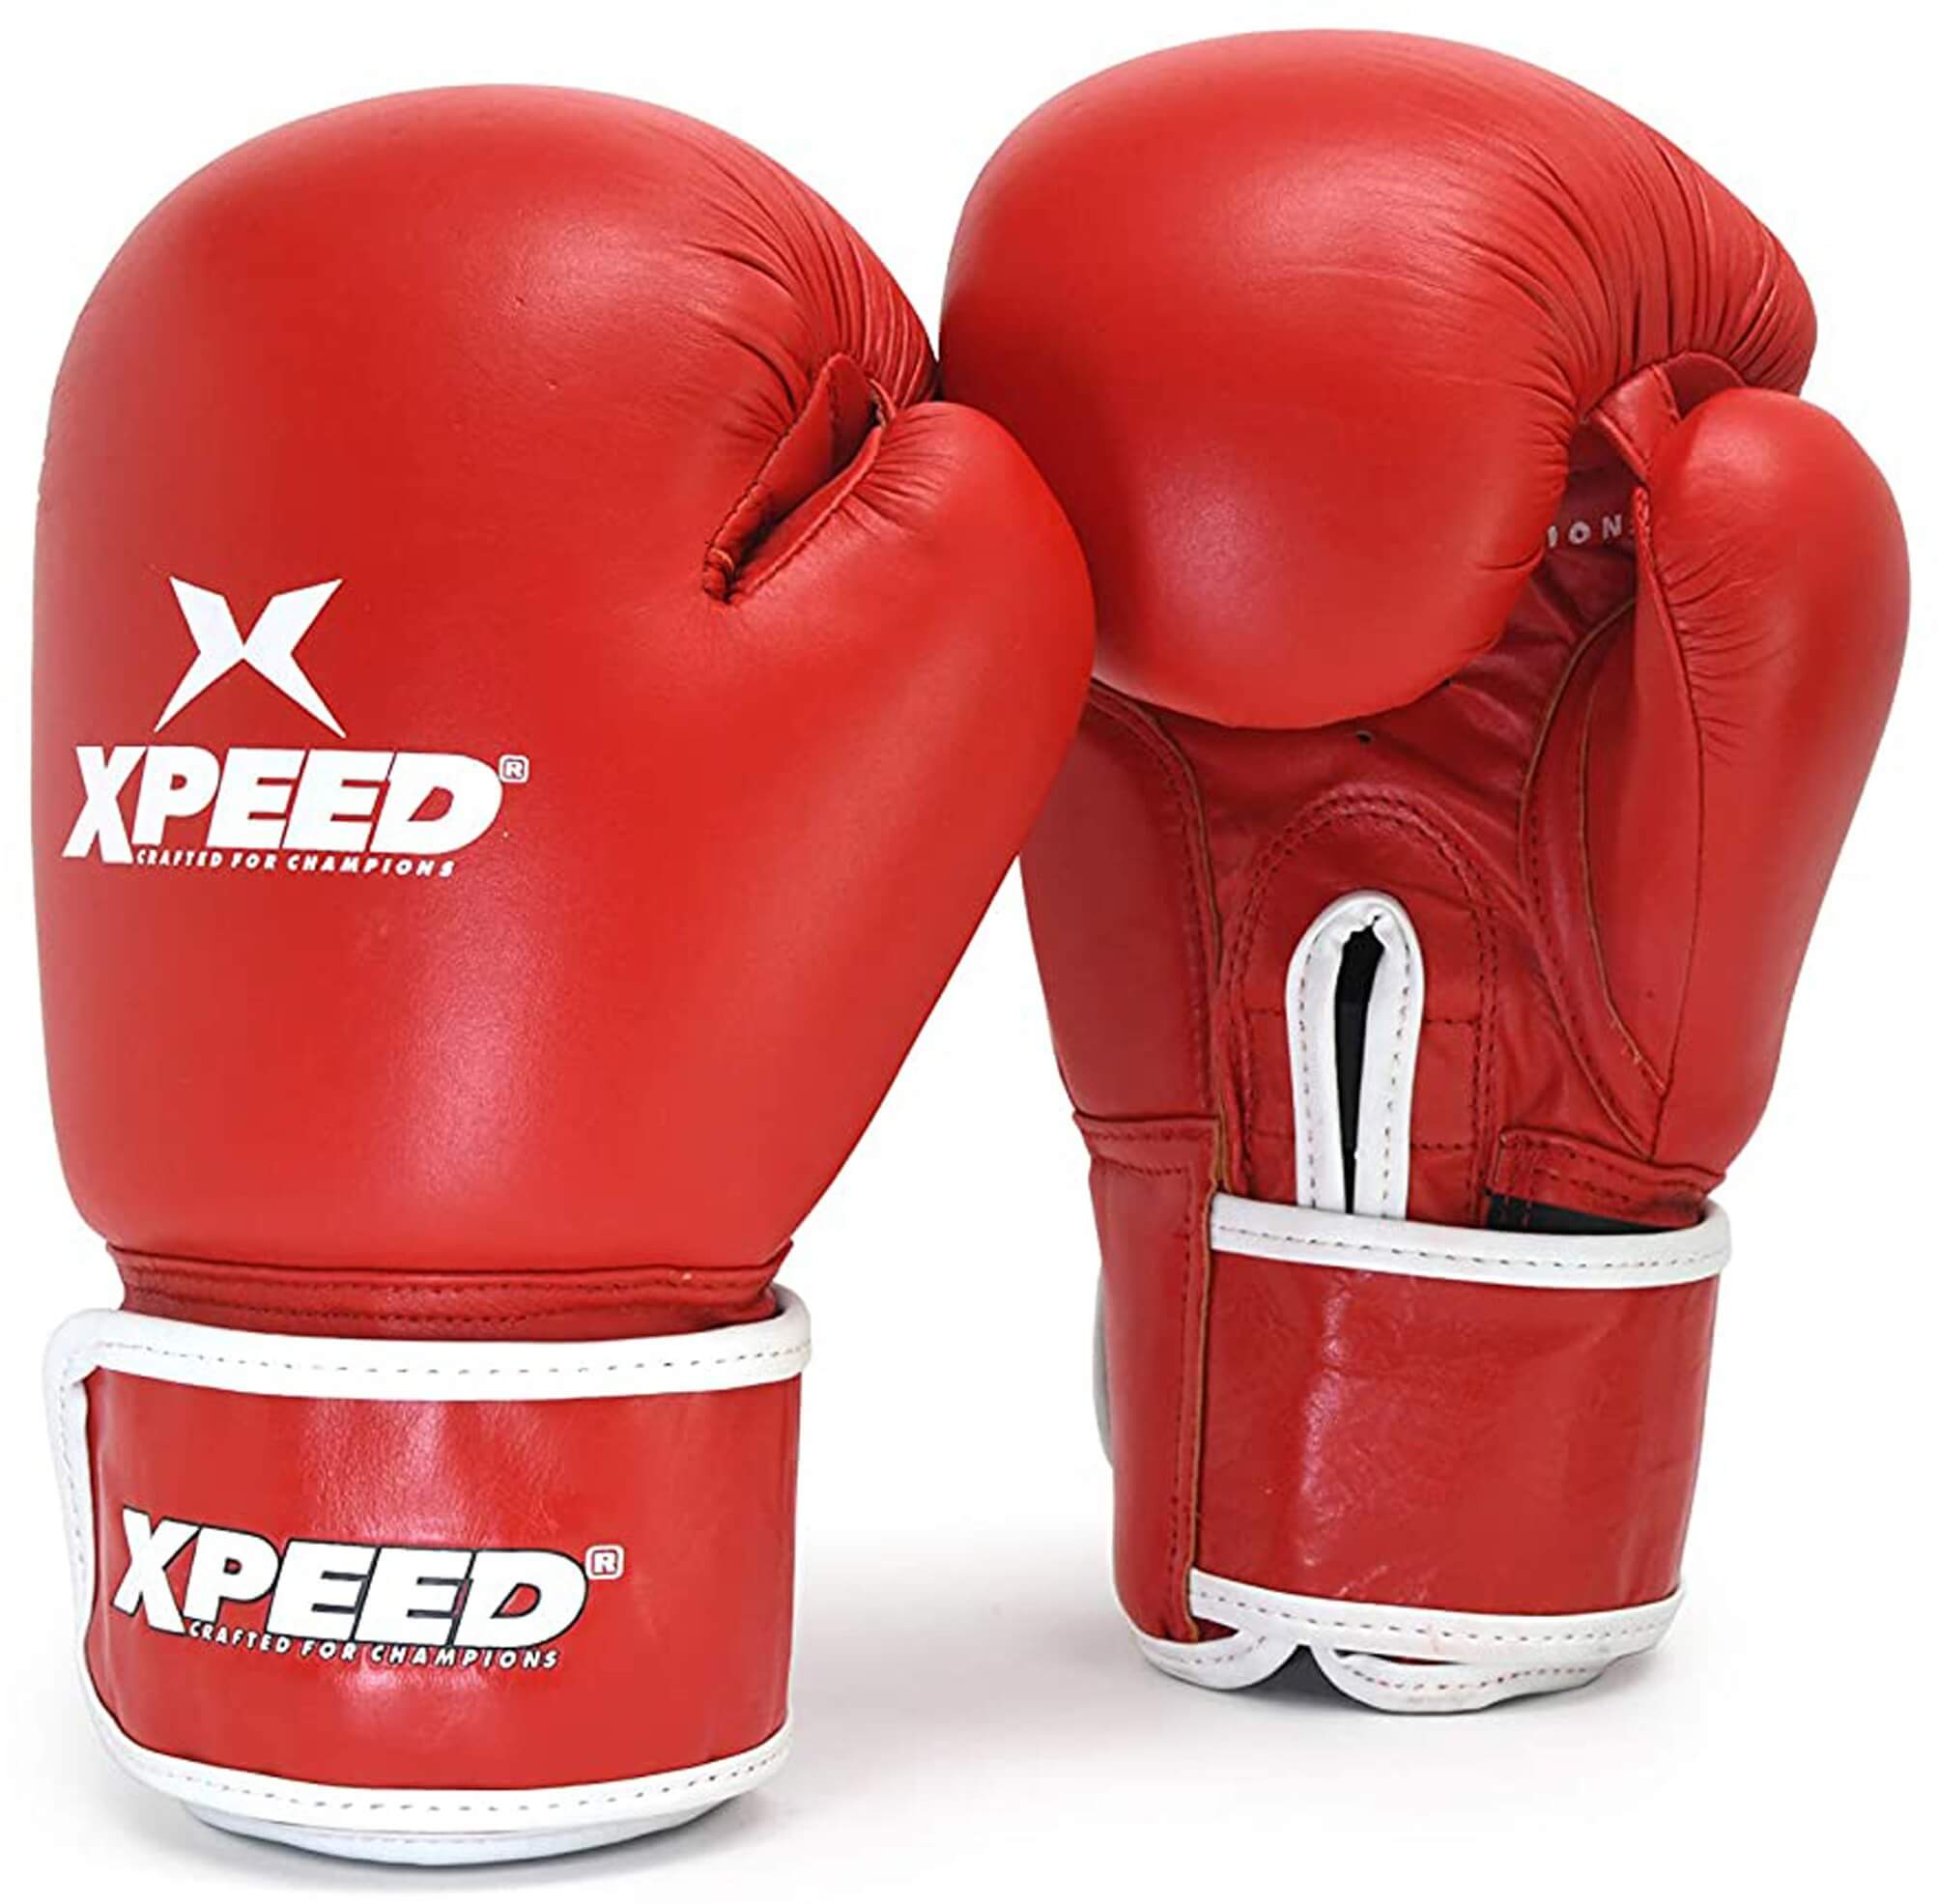 Xpeed Xp101 Contest boxing Gloves (Red)